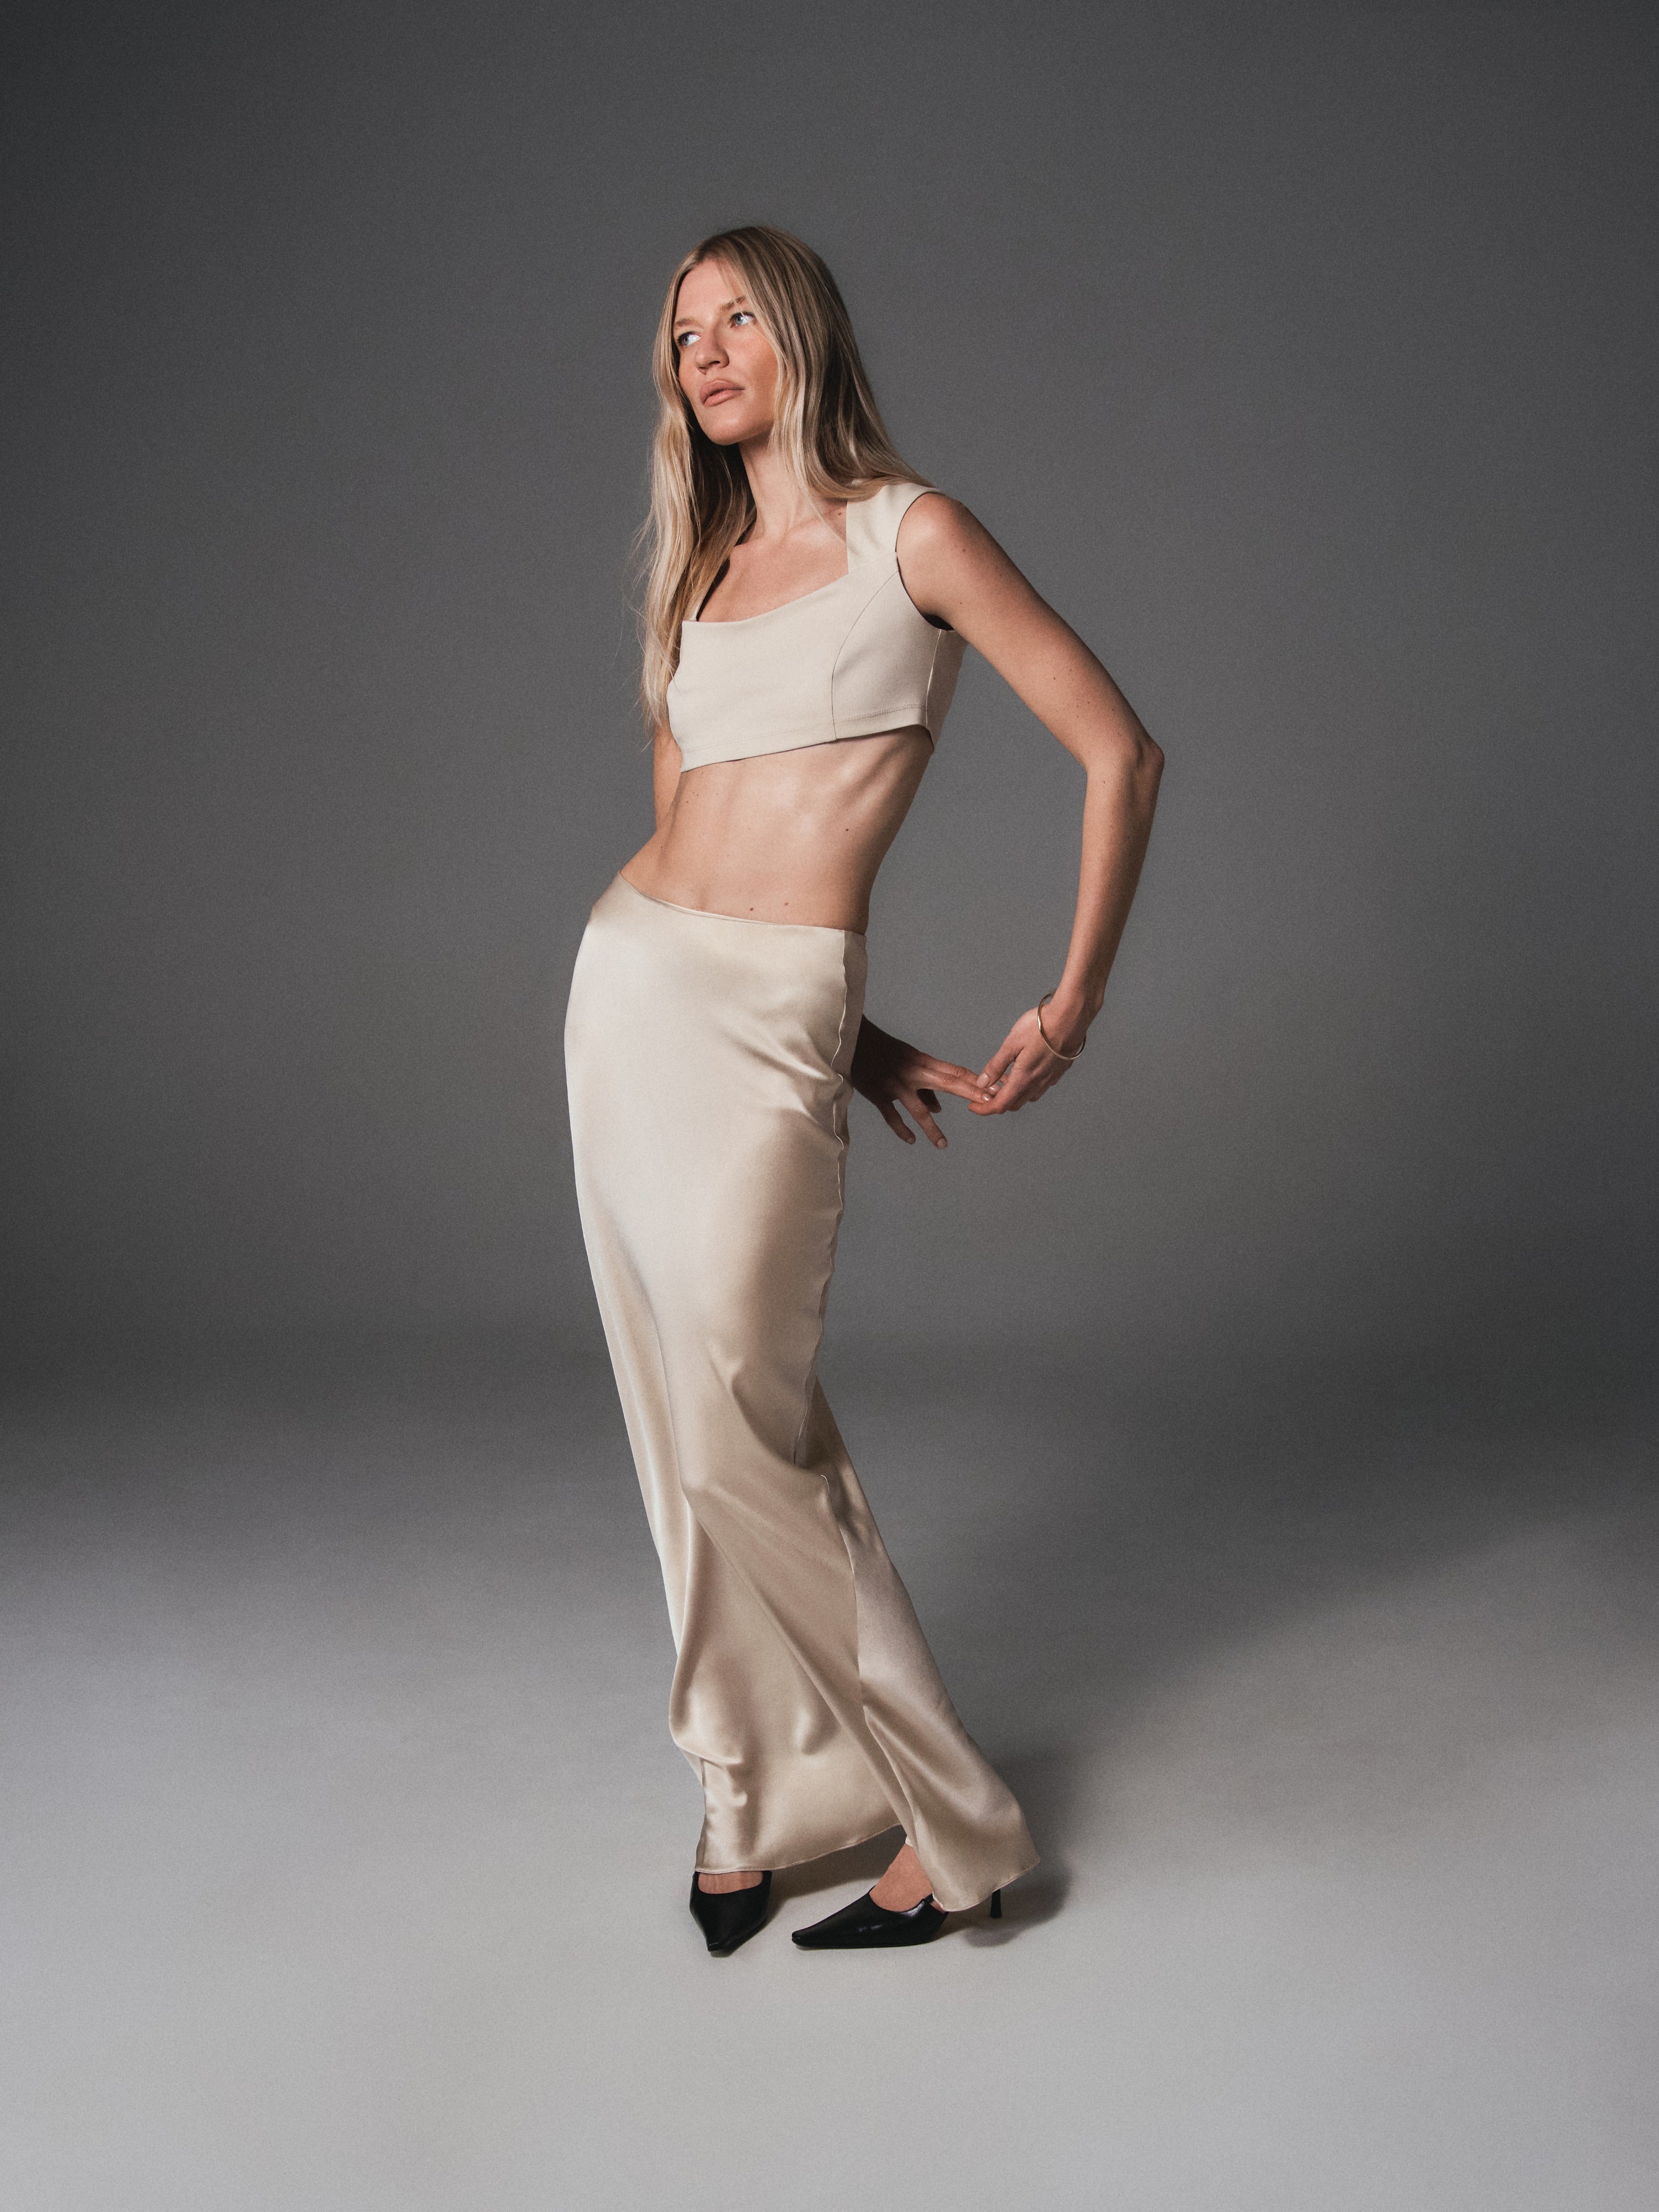 A model posing in a crop top made from organic cotton and a silk maxi skirt in light beige color